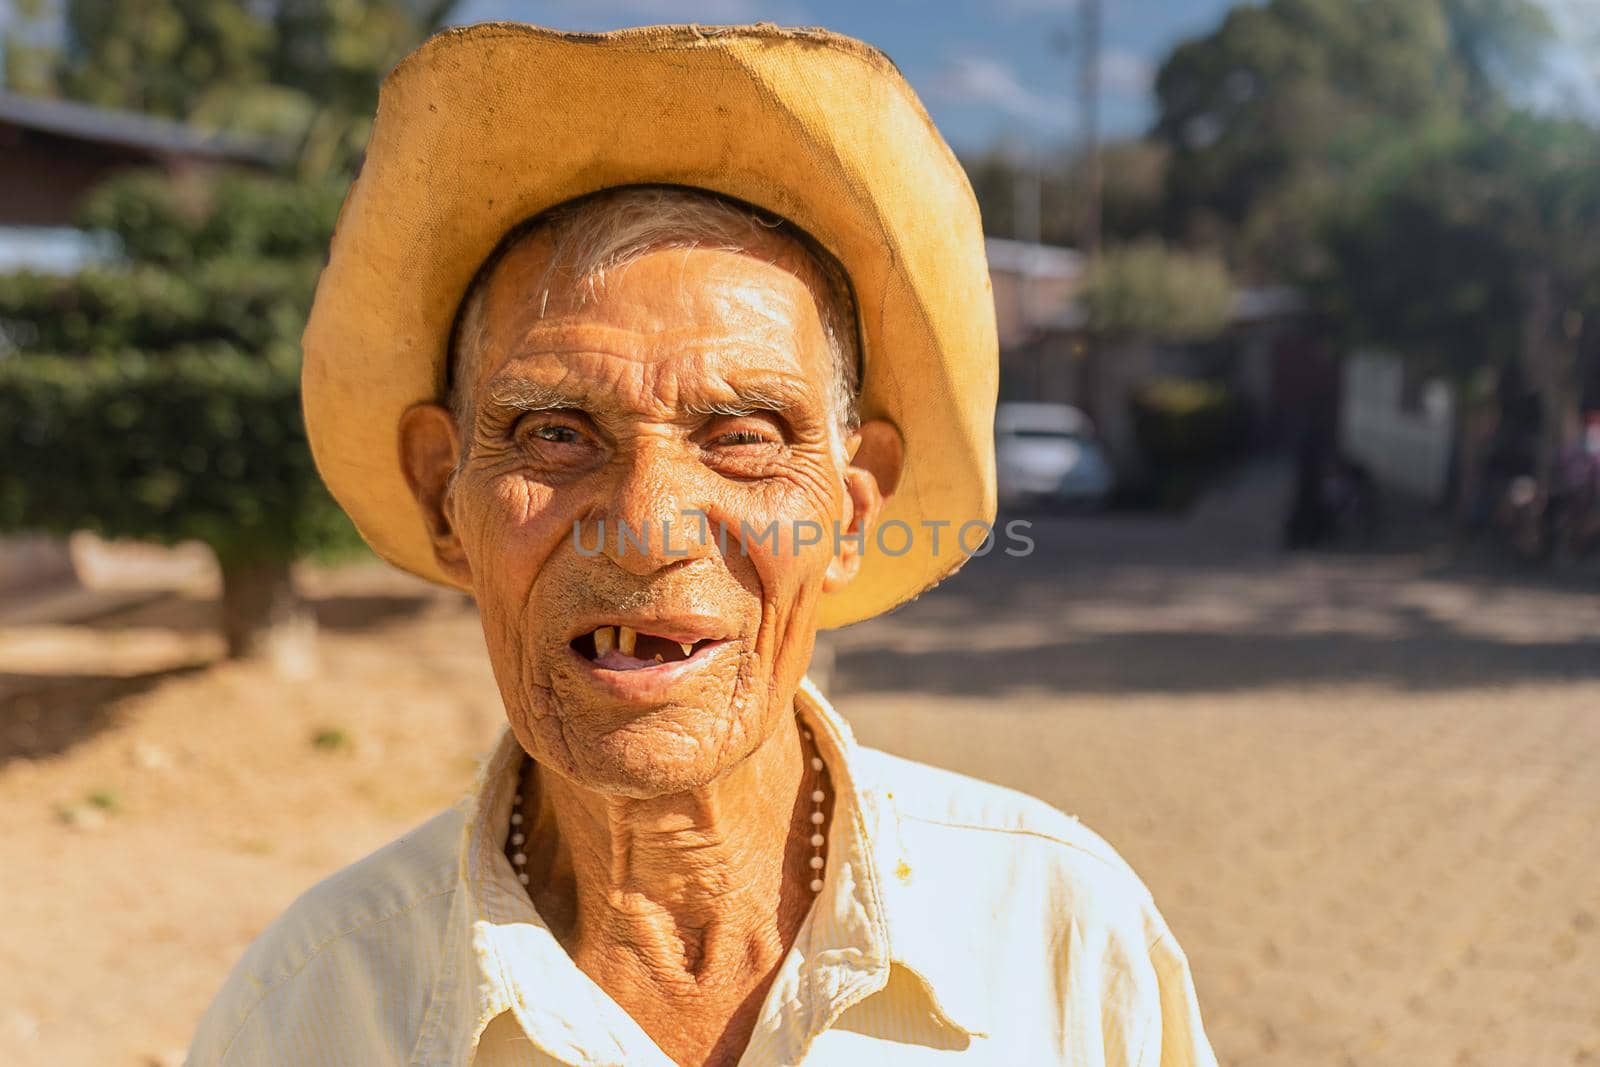 Latin old man without teeth and wearing a hat smiling and looking at the camera during a sunny day in Nicaragua.